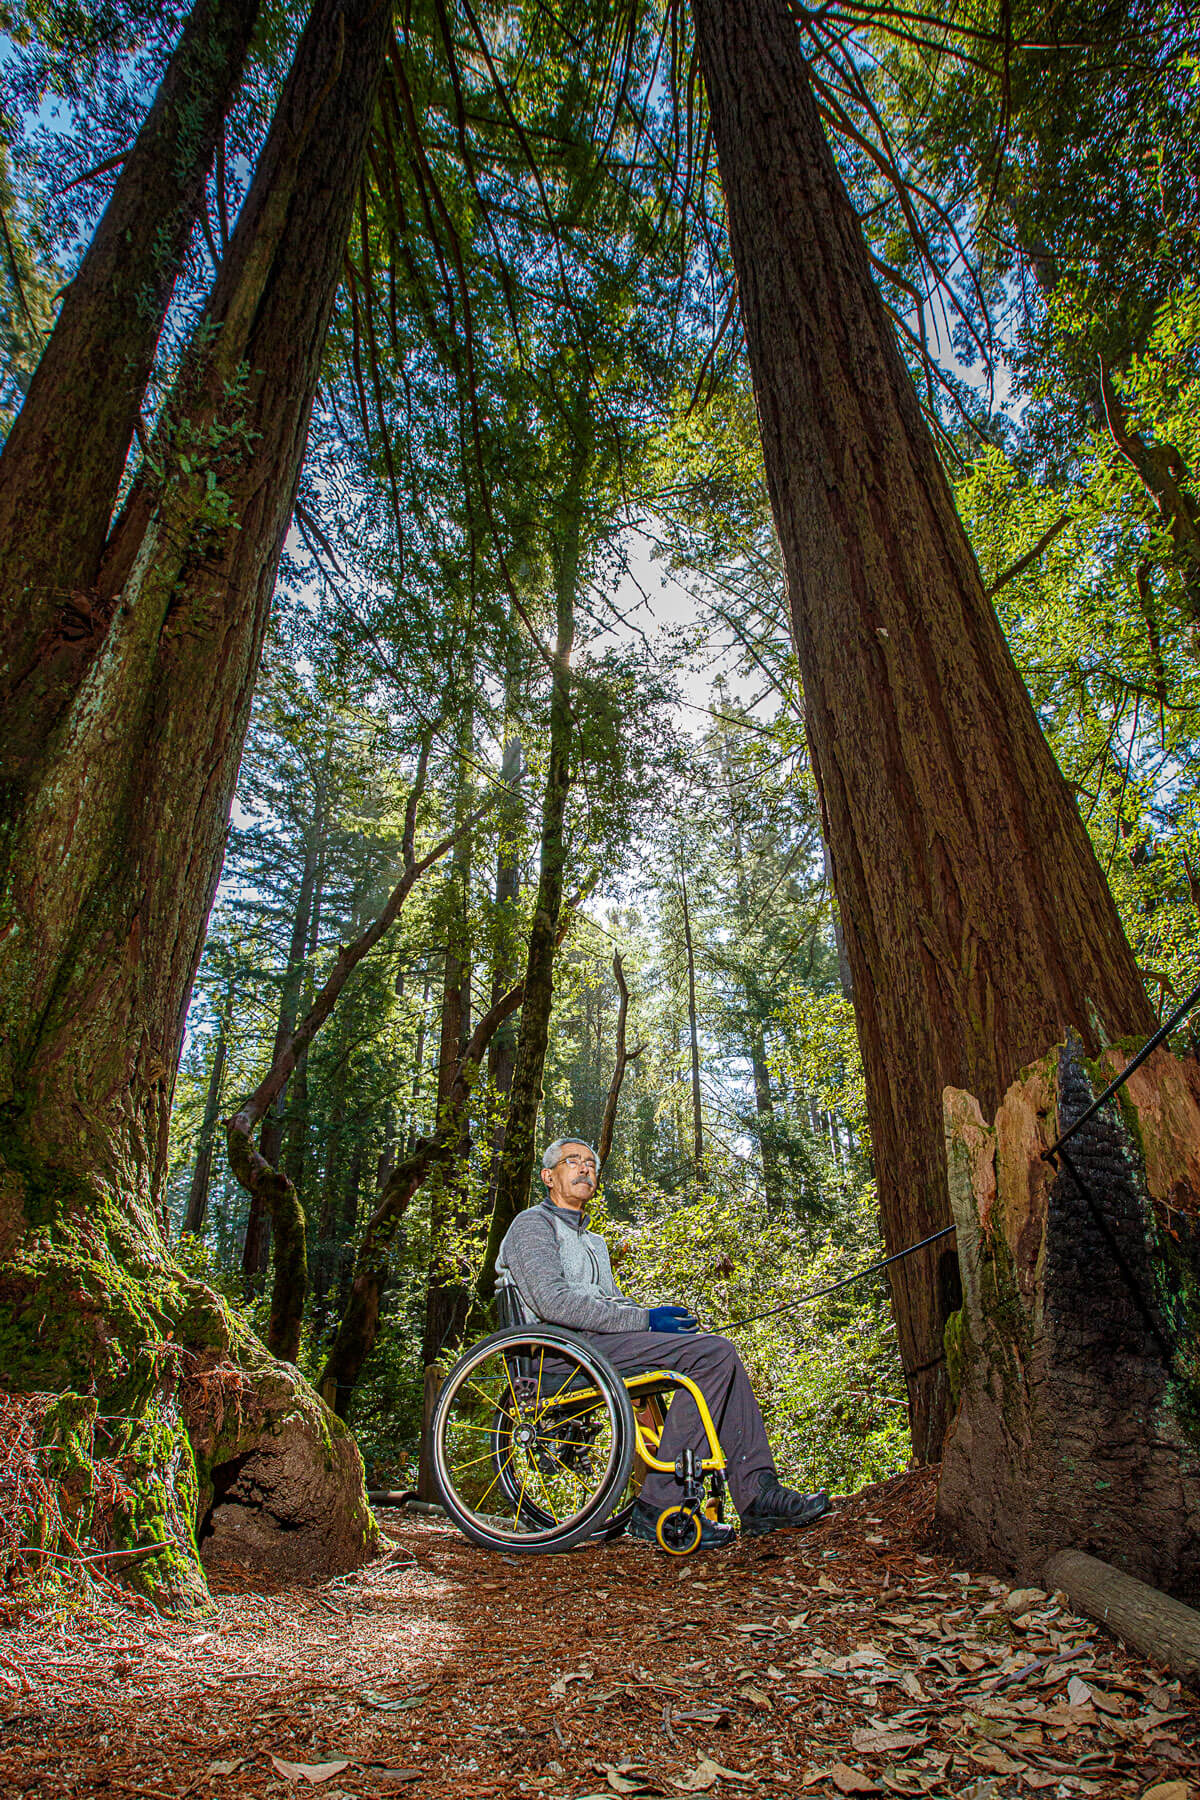 Bob Coomber amongst towering redwoods by Ian Bornarth